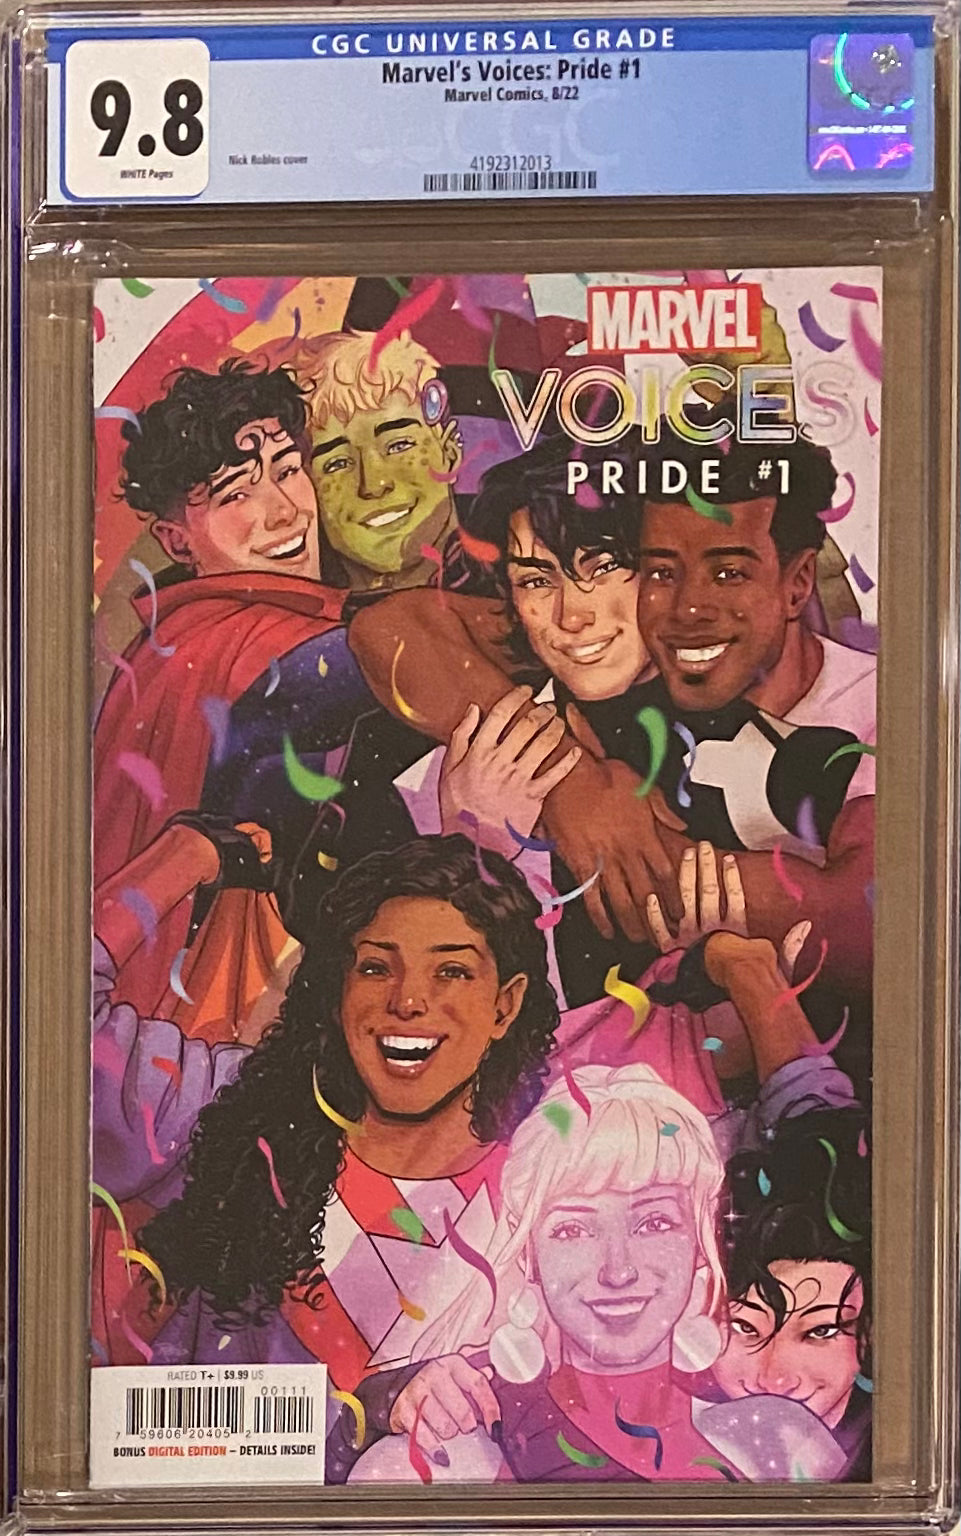 Marvel Voices: Pride #1 CGC 9.8 - First appearance Escapade